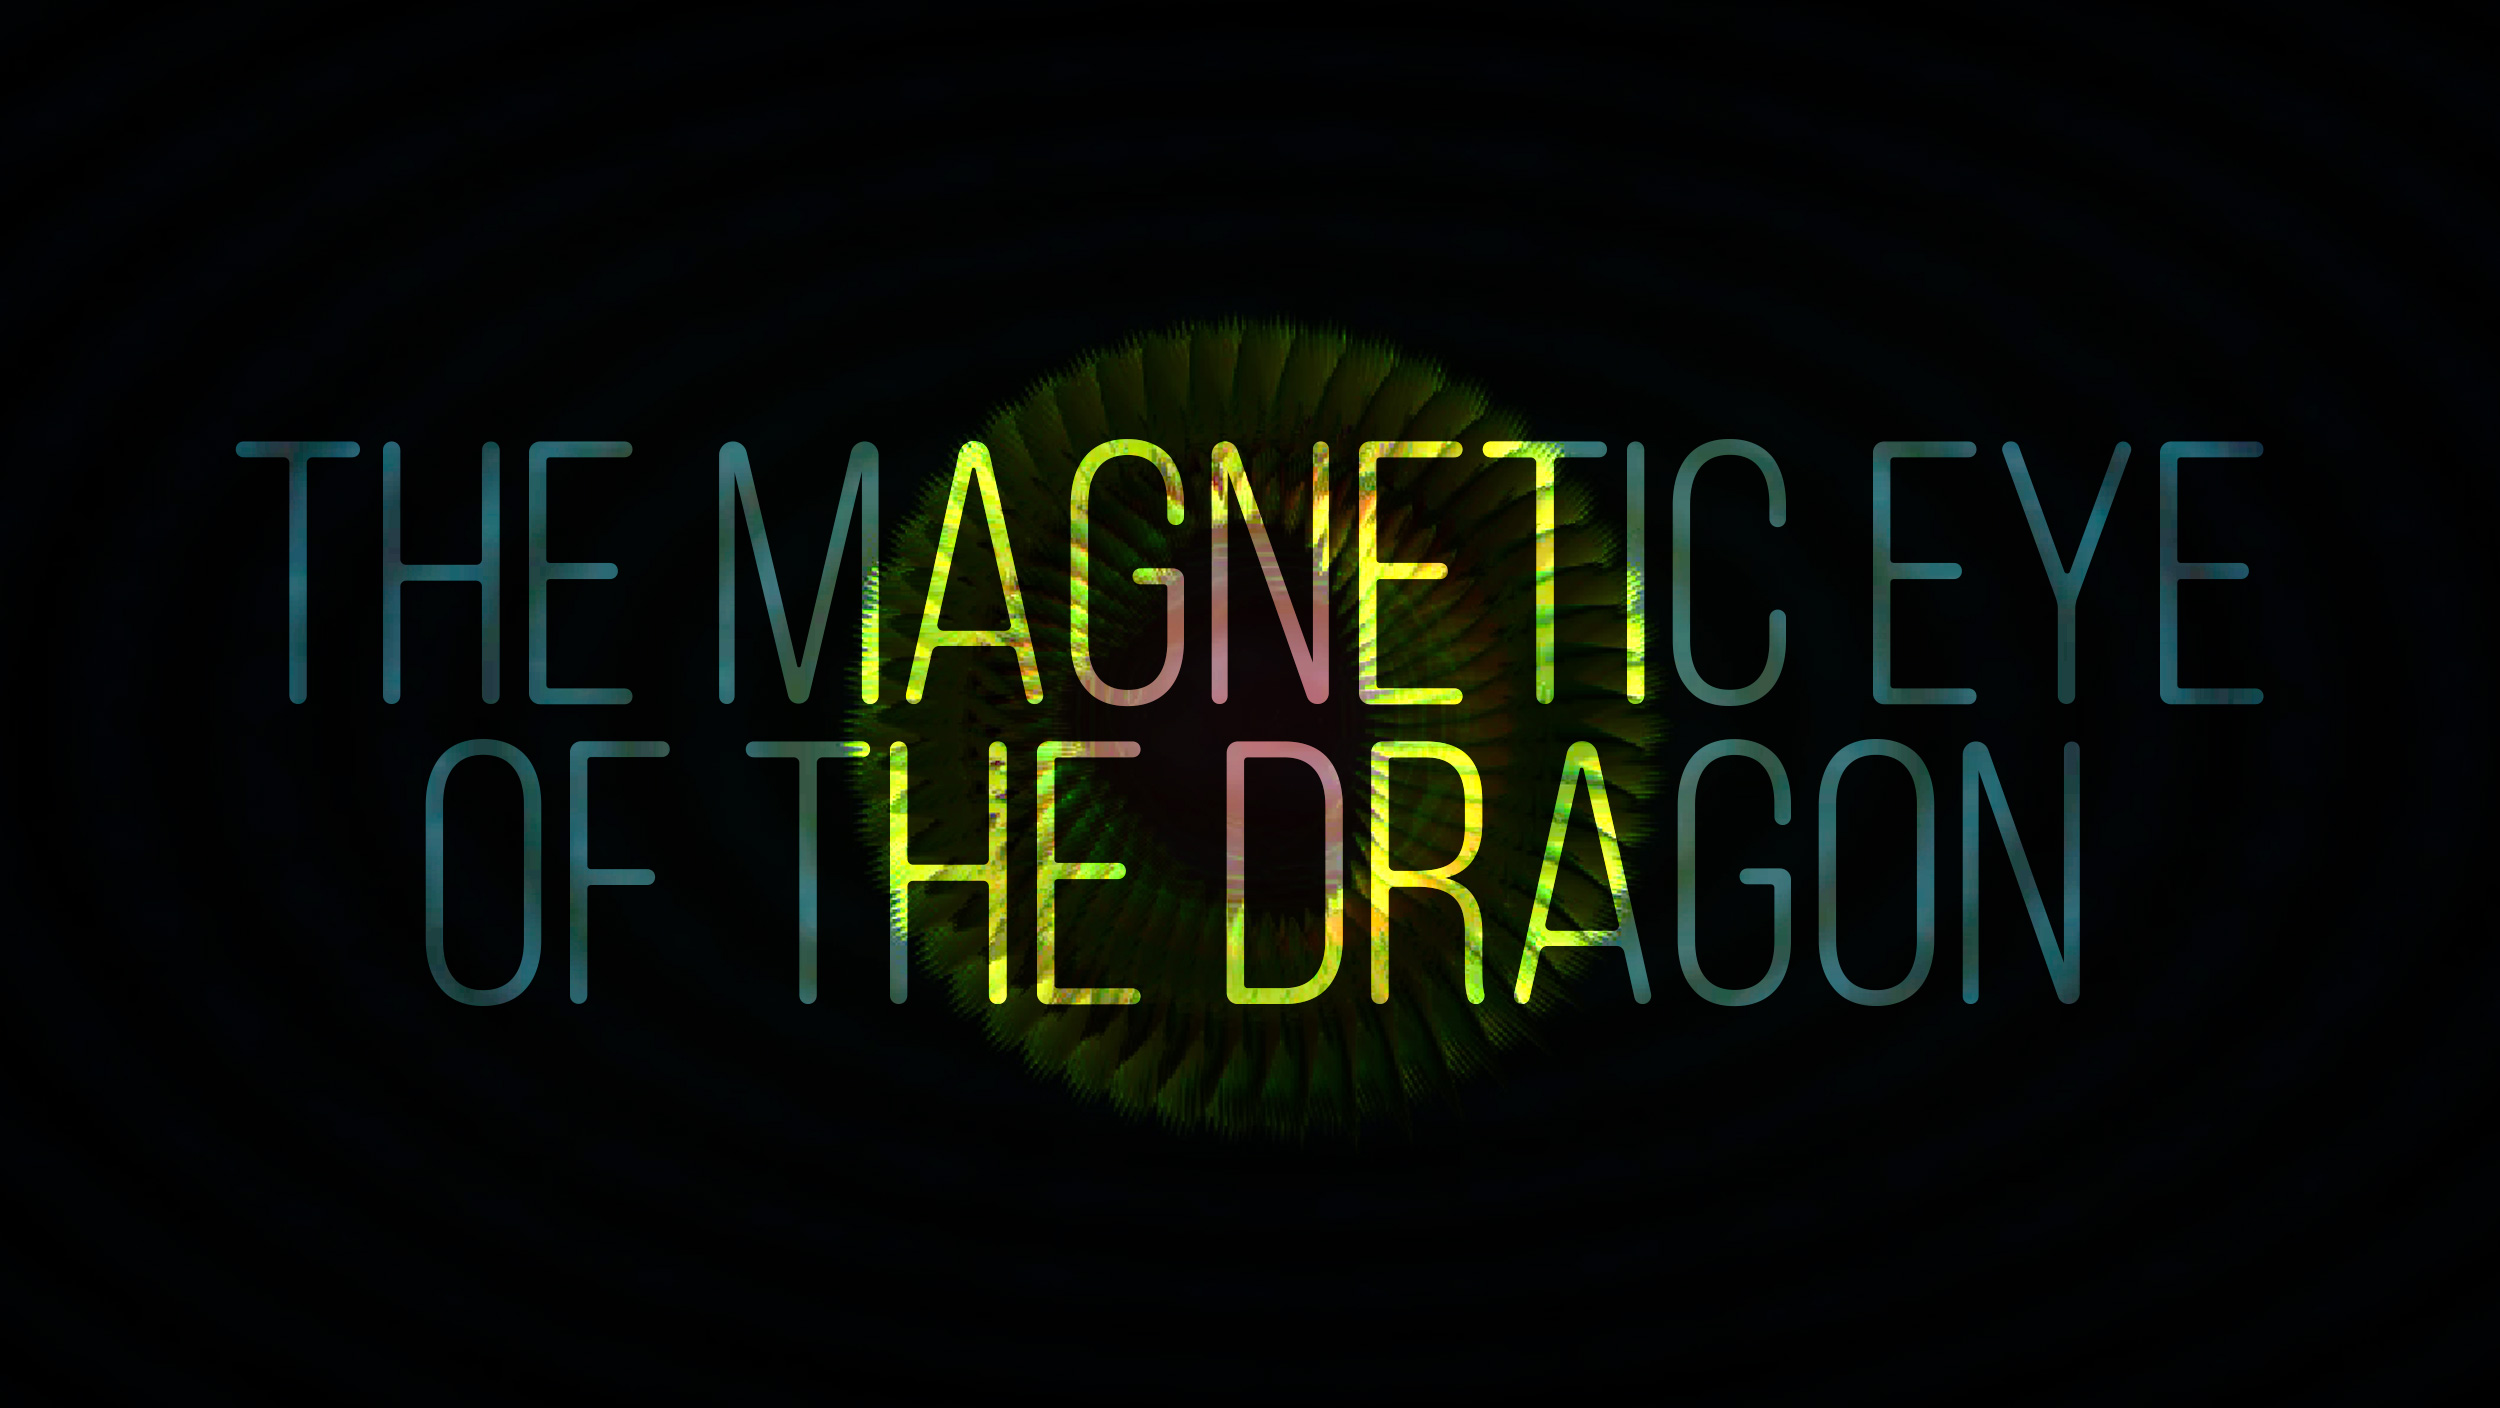 The magnetic eye of the Dragon and his earthly desires